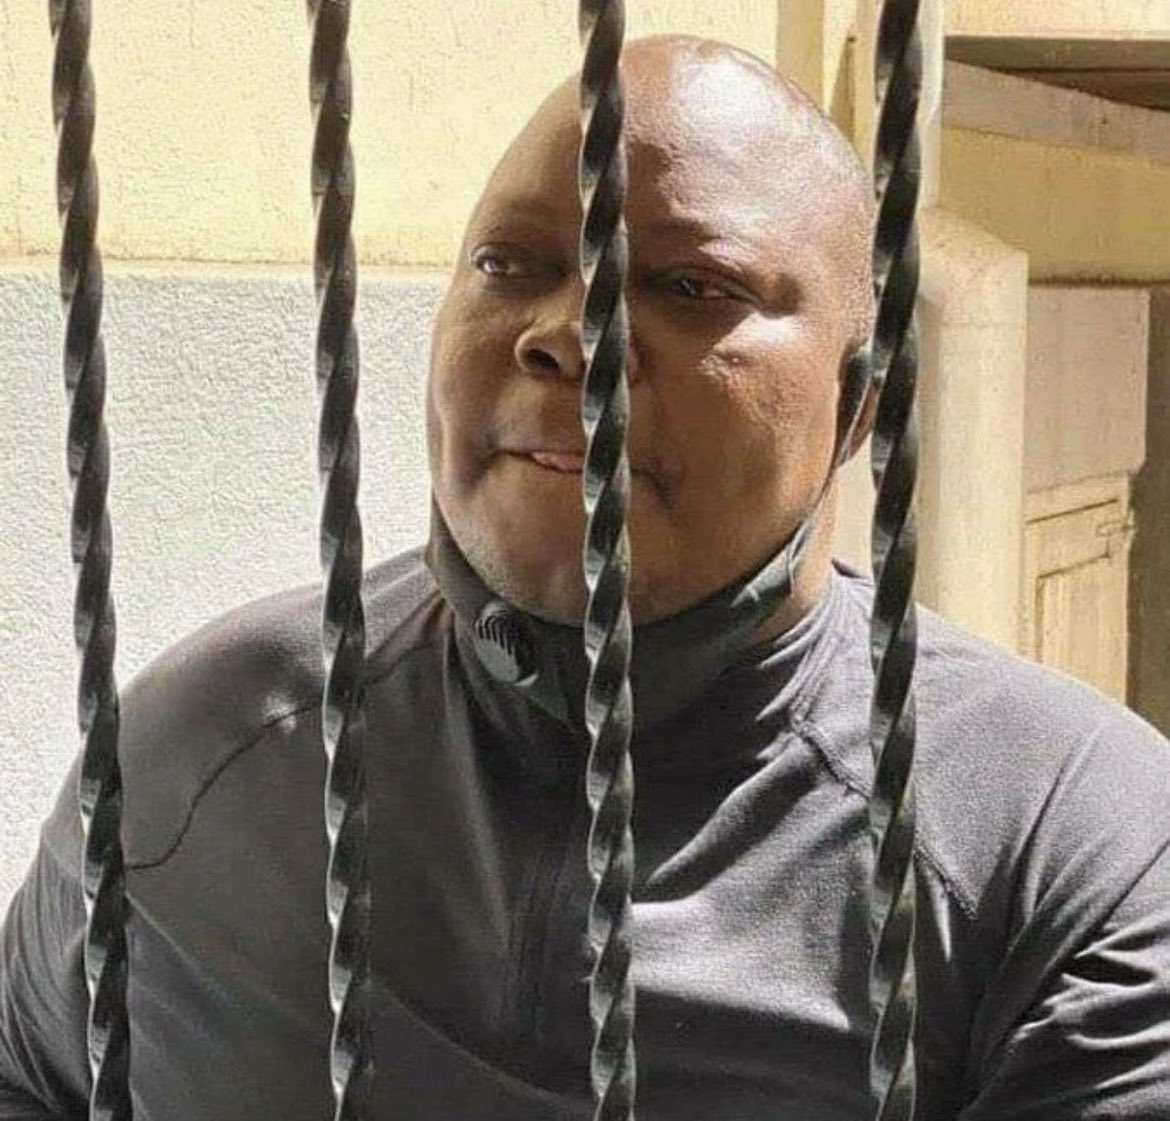 Zimbabwean political prisoner and opposition Member of Parliament @JobSikhala1 has been in prison as an act of political persecution for 337 days.

Zimbabwe is being punished internationally because of these irresponsible acts by ZANUPF!

Sikhala is an innocent man!

#FreeWiwa